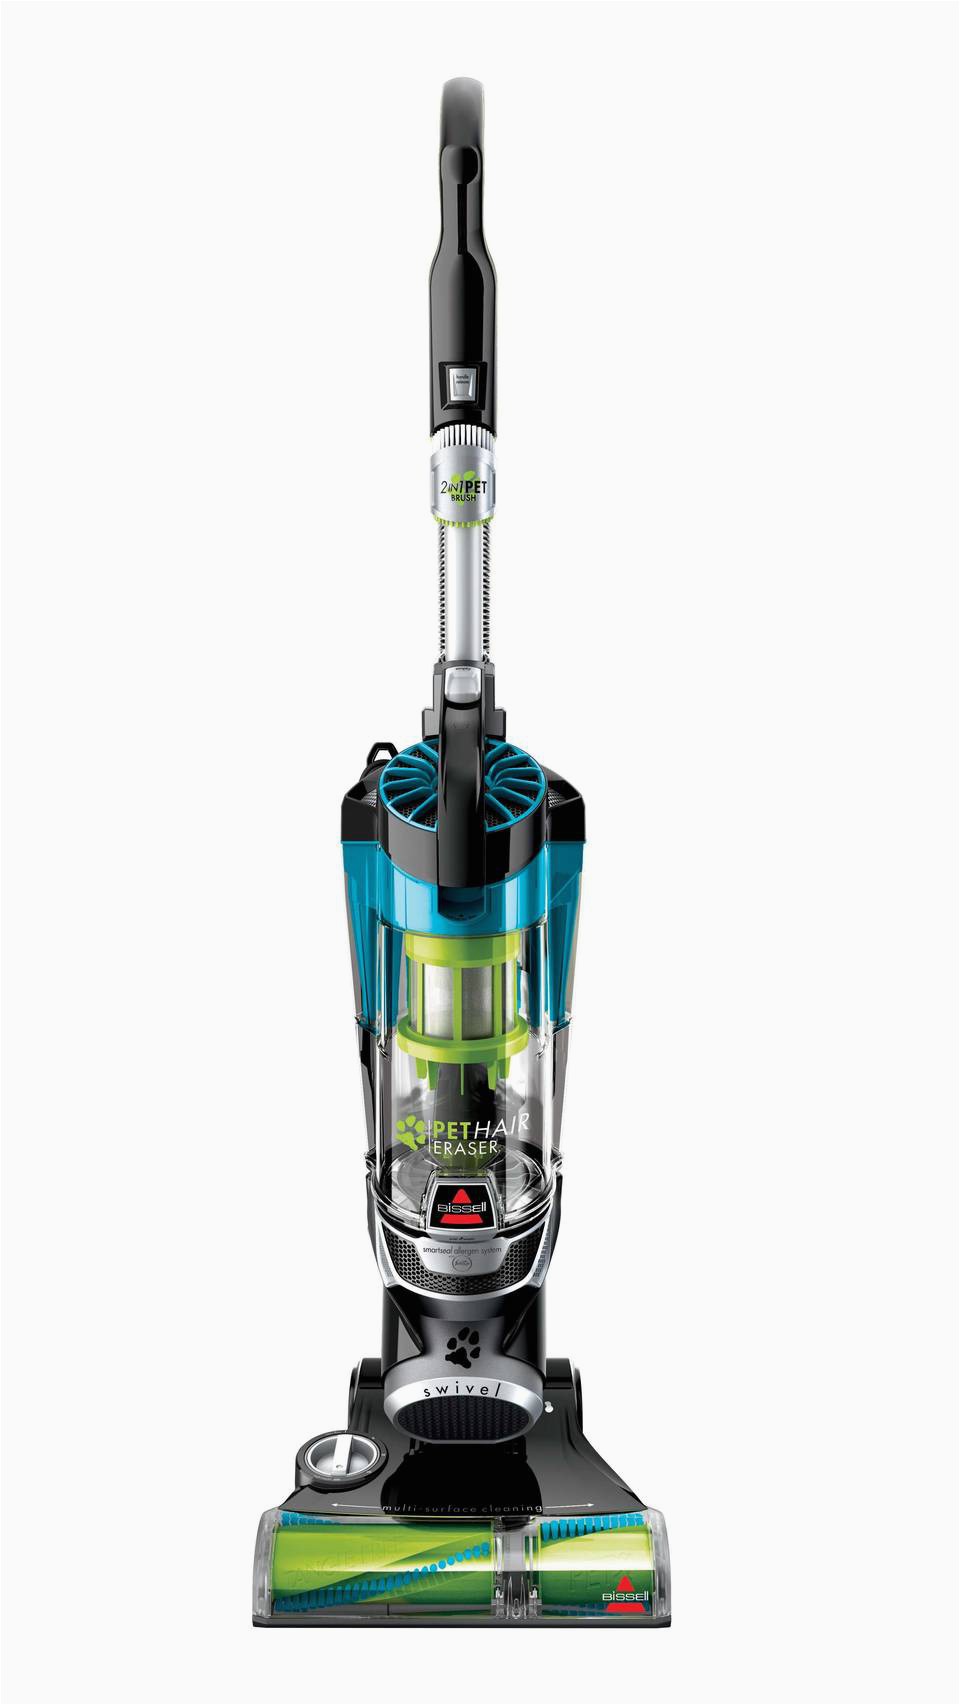 Rug Cleaner Bed Bath and Beyond Bissell Pet Hair Eraser Upright Vacuum